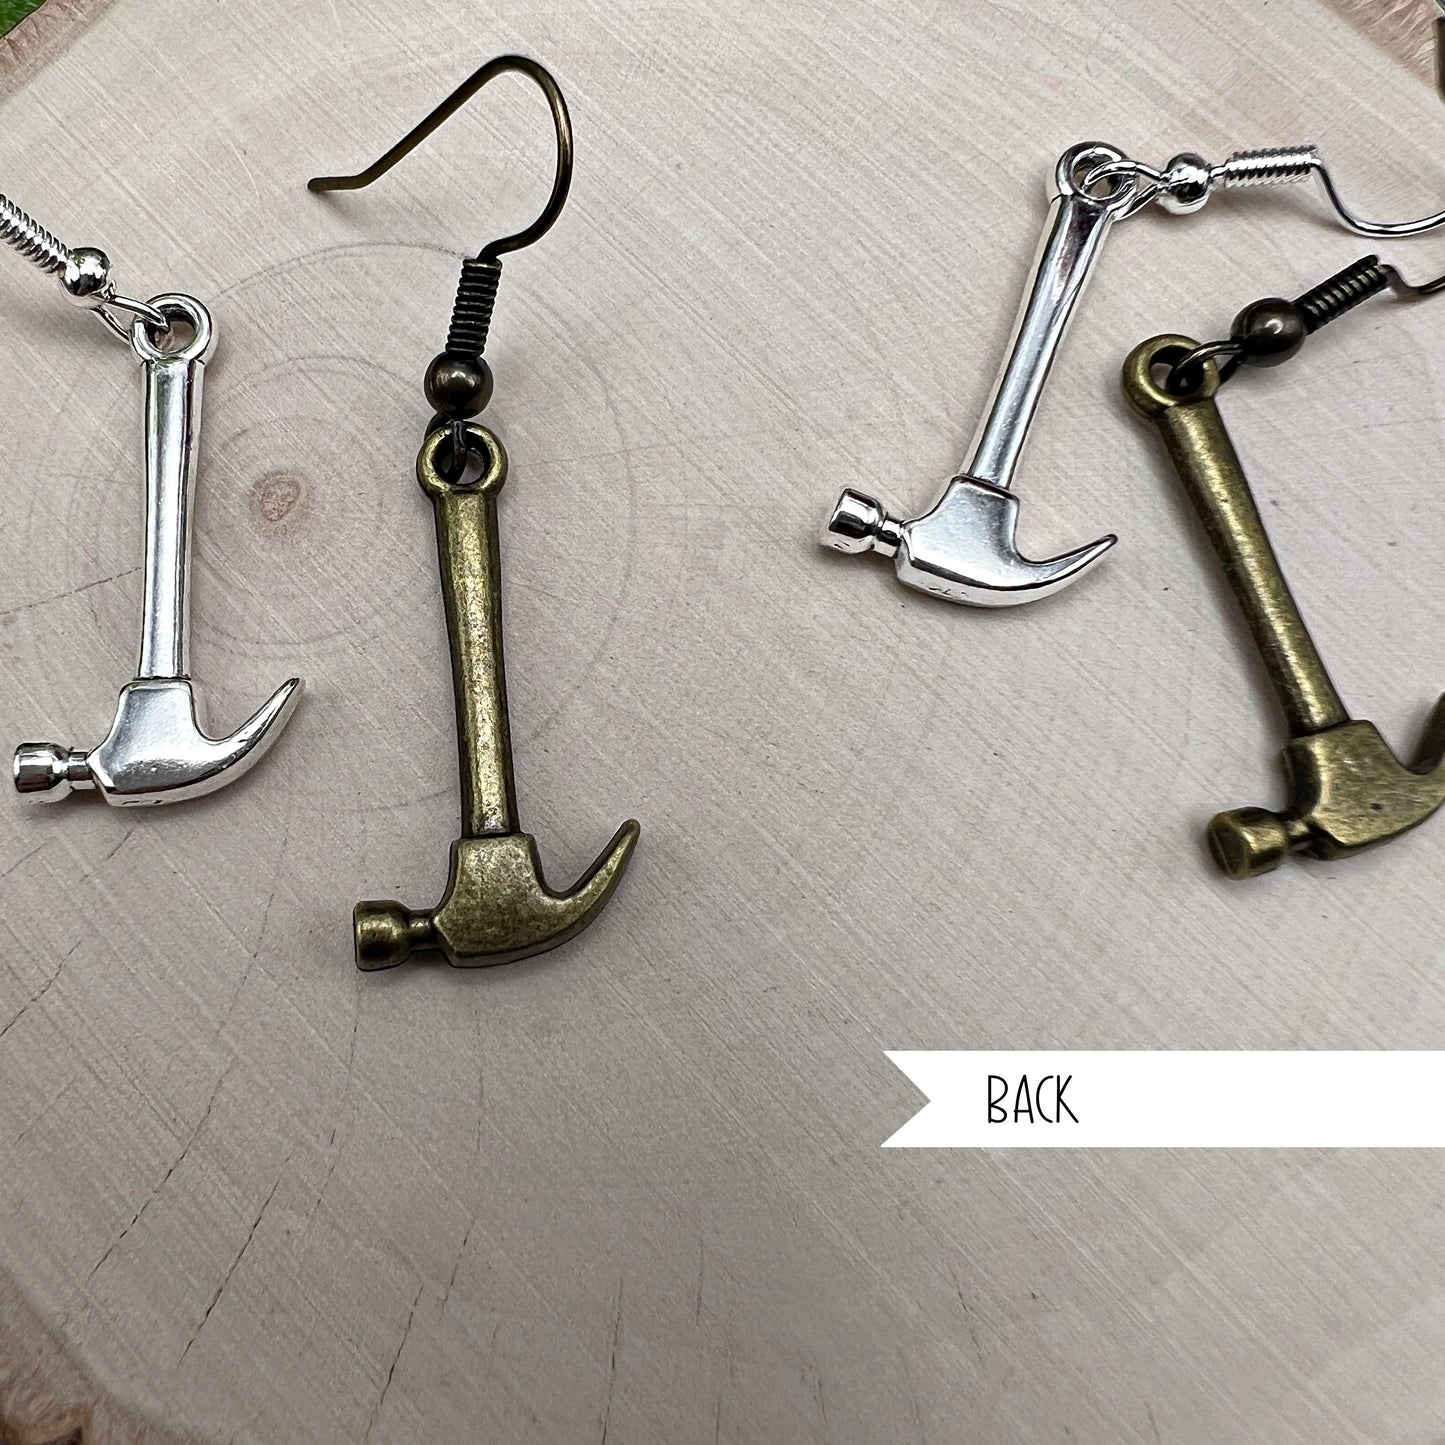 Tiny Hammer  Earrings - Quirky Silvertone or Antique Bronze Hypoallergenic Gift for DIY and Construction Enthusiasts